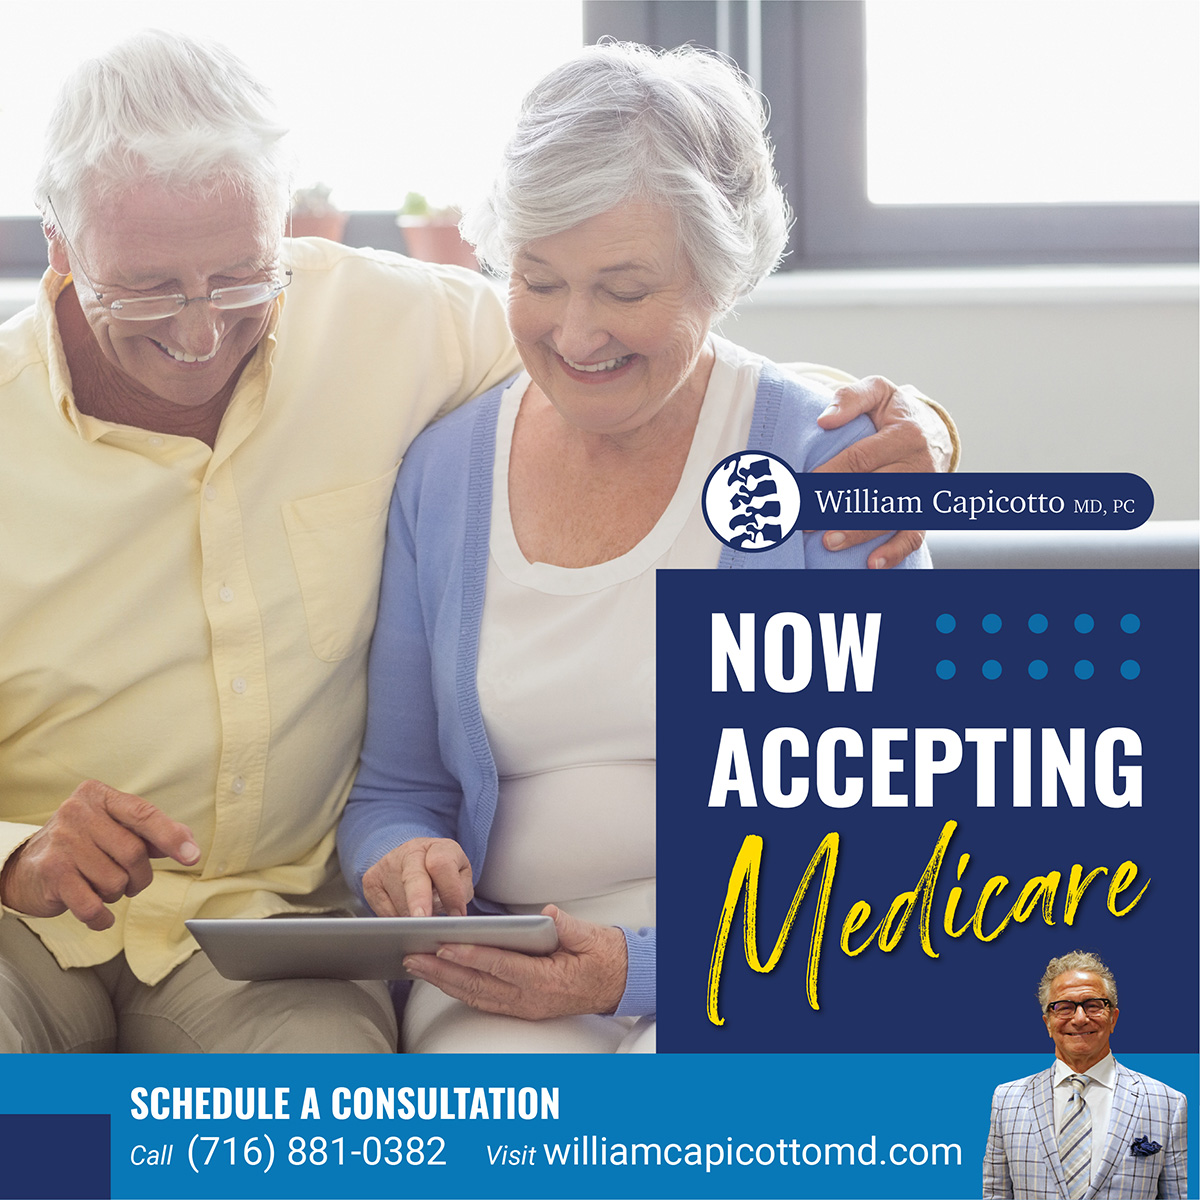 William Capicotto MD is now accepting Medicare.